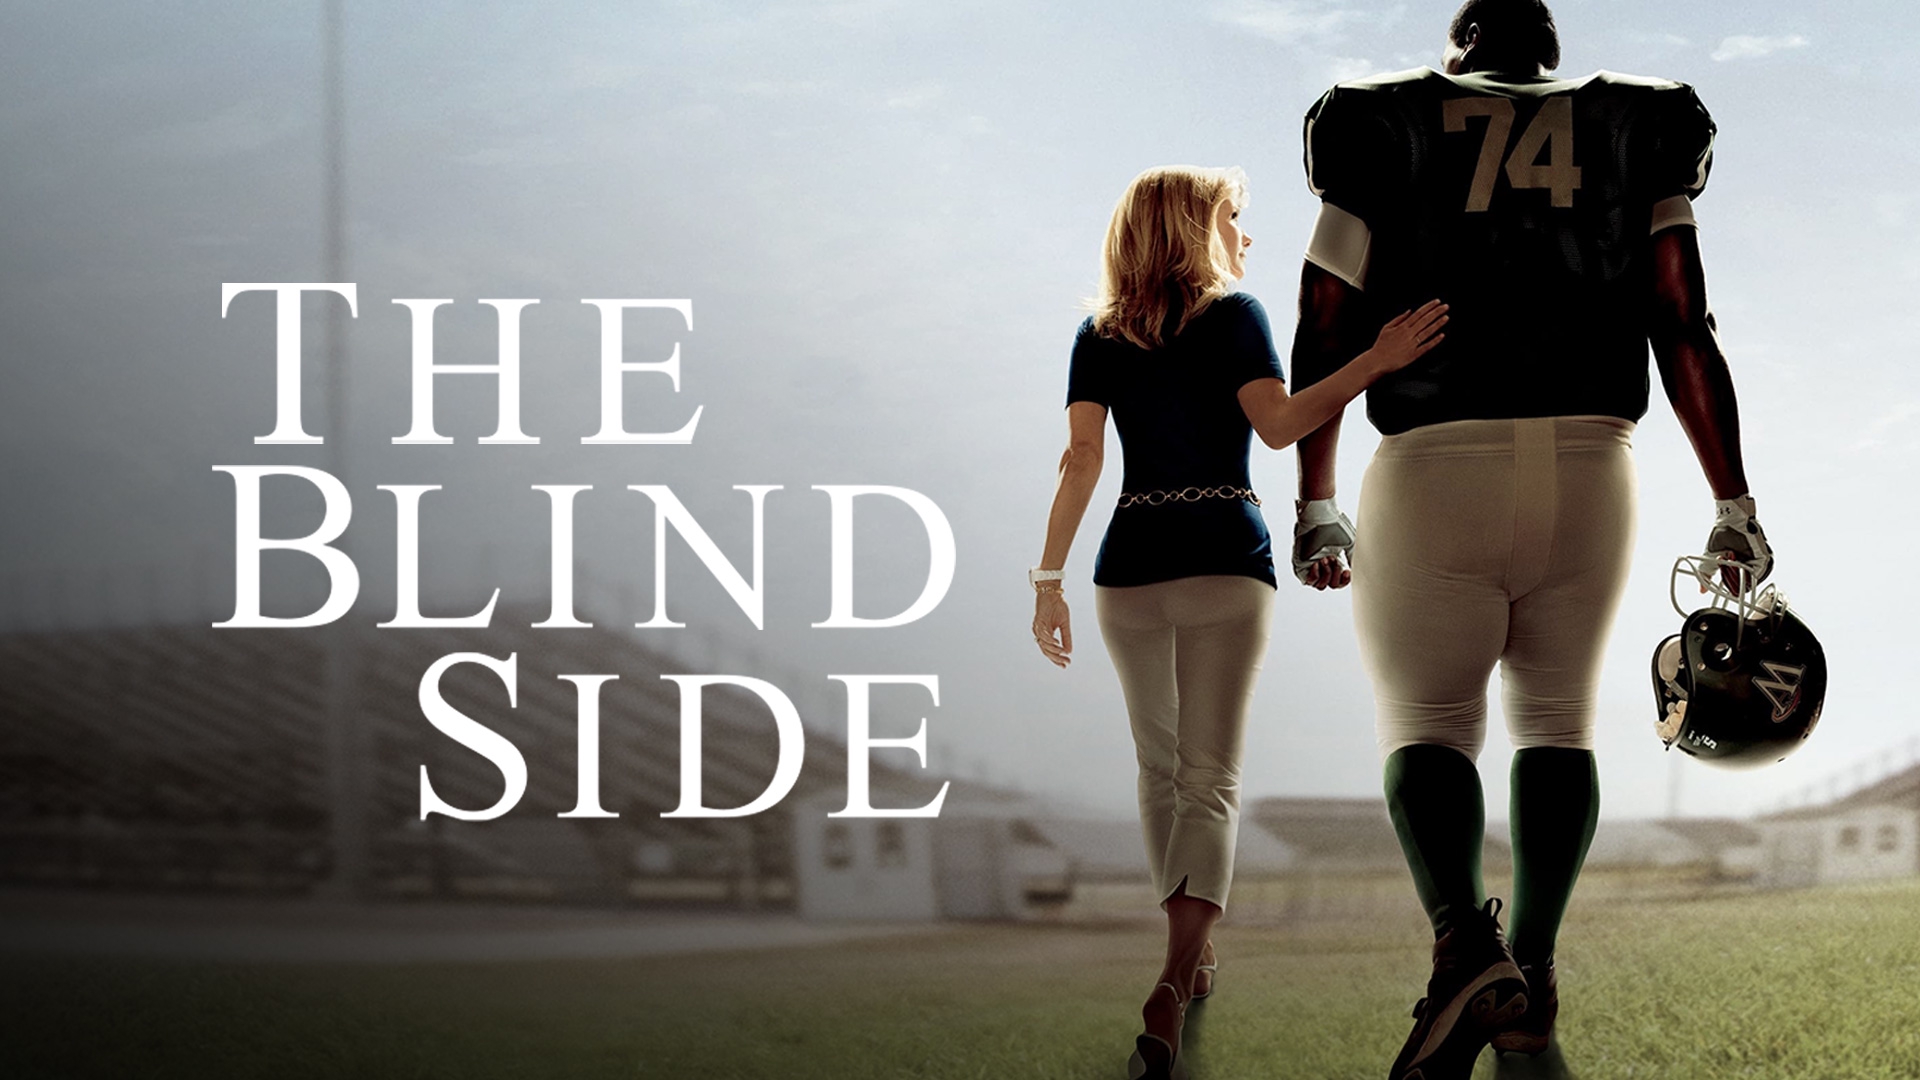 44-facts-about-the-movie-the-blind-side